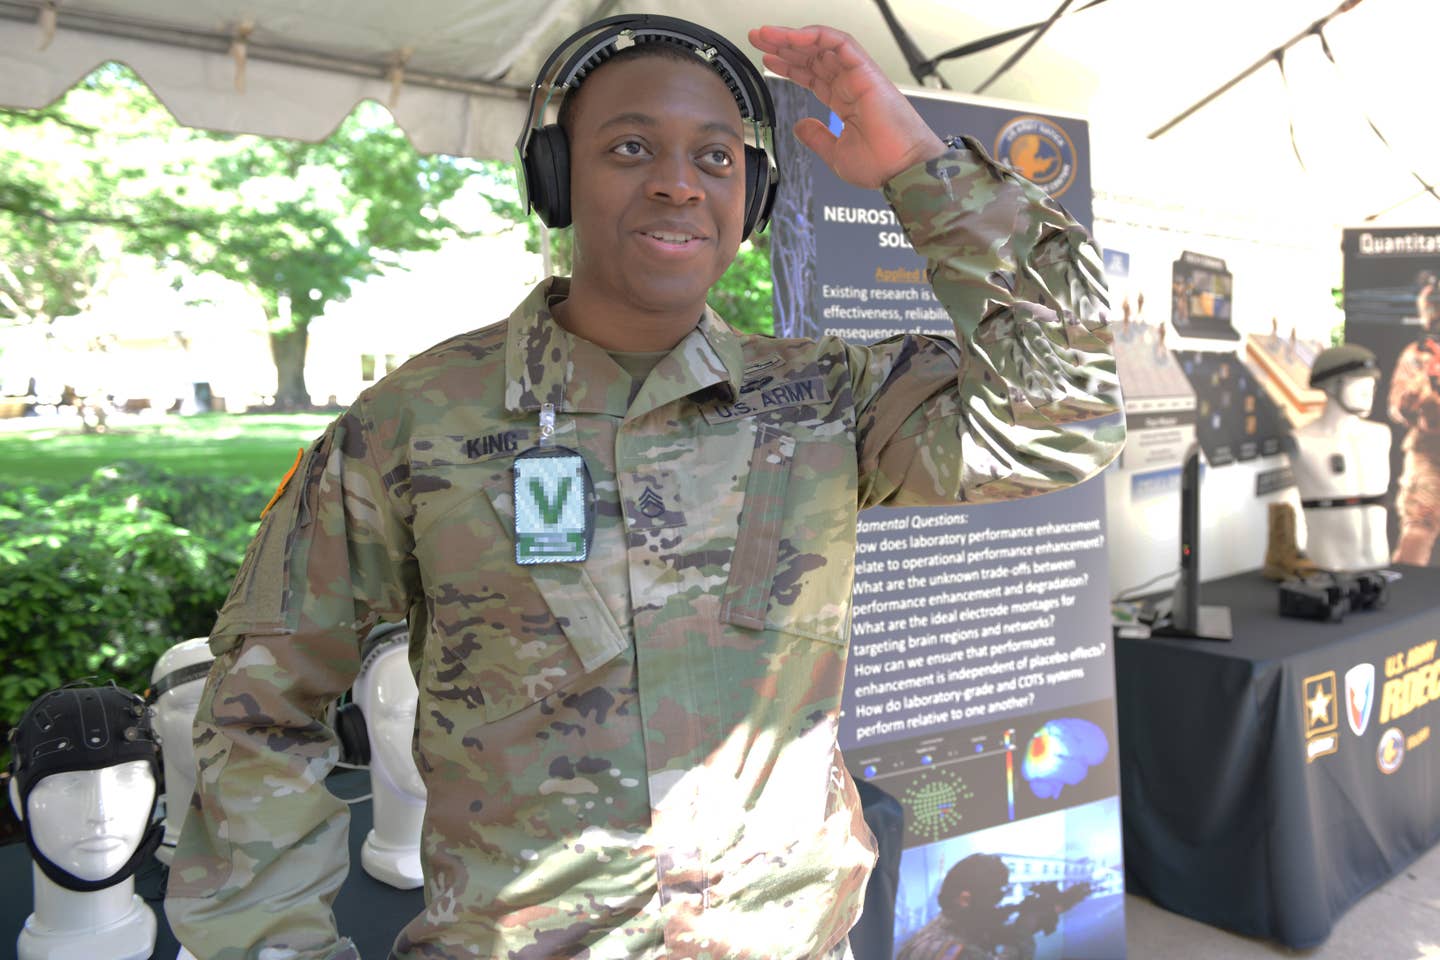 Staff Sgt. Christian King-Lincoln tries on a headset that is providing neurostimulation from a wireless transmitter behind him. The stimulation is not going through his ear pads, but instead through an array of small flexible inducers along the adjustable headband.